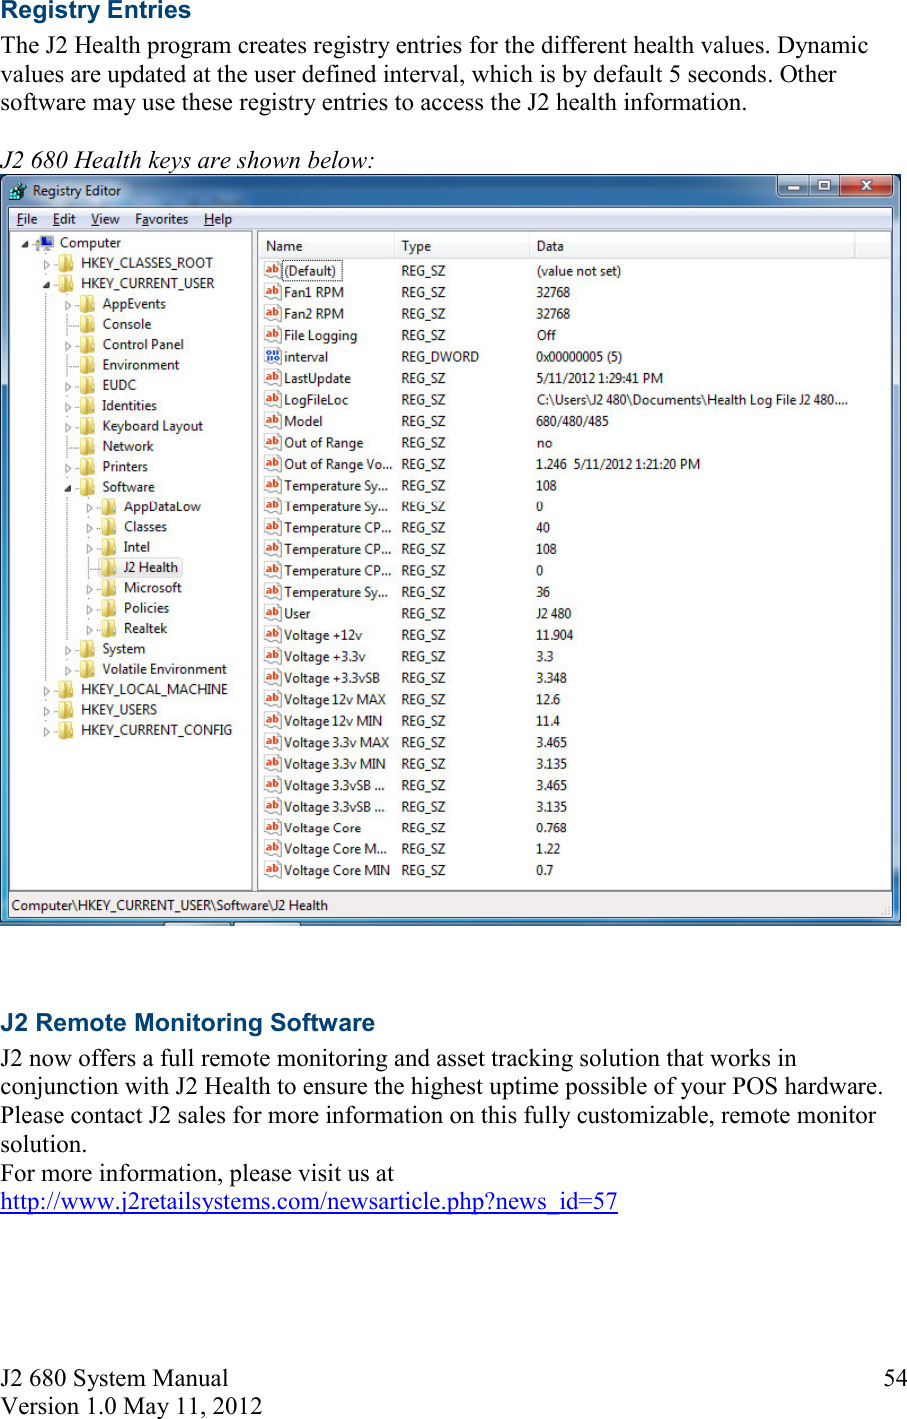 J2 680 System Manual Version 1.0 May 11, 2012     54Registry Entries The J2 Health program creates registry entries for the different health values. Dynamic values are updated at the user defined interval, which is by default 5 seconds. Other software may use these registry entries to access the J2 health information.  J2 680 Health keys are shown below:    J2 Remote Monitoring Software J2 now offers a full remote monitoring and asset tracking solution that works in conjunction with J2 Health to ensure the highest uptime possible of your POS hardware.  Please contact J2 sales for more information on this fully customizable, remote monitor solution. For more information, please visit us at http://www.j2retailsystems.com/newsarticle.php?news_id=57     